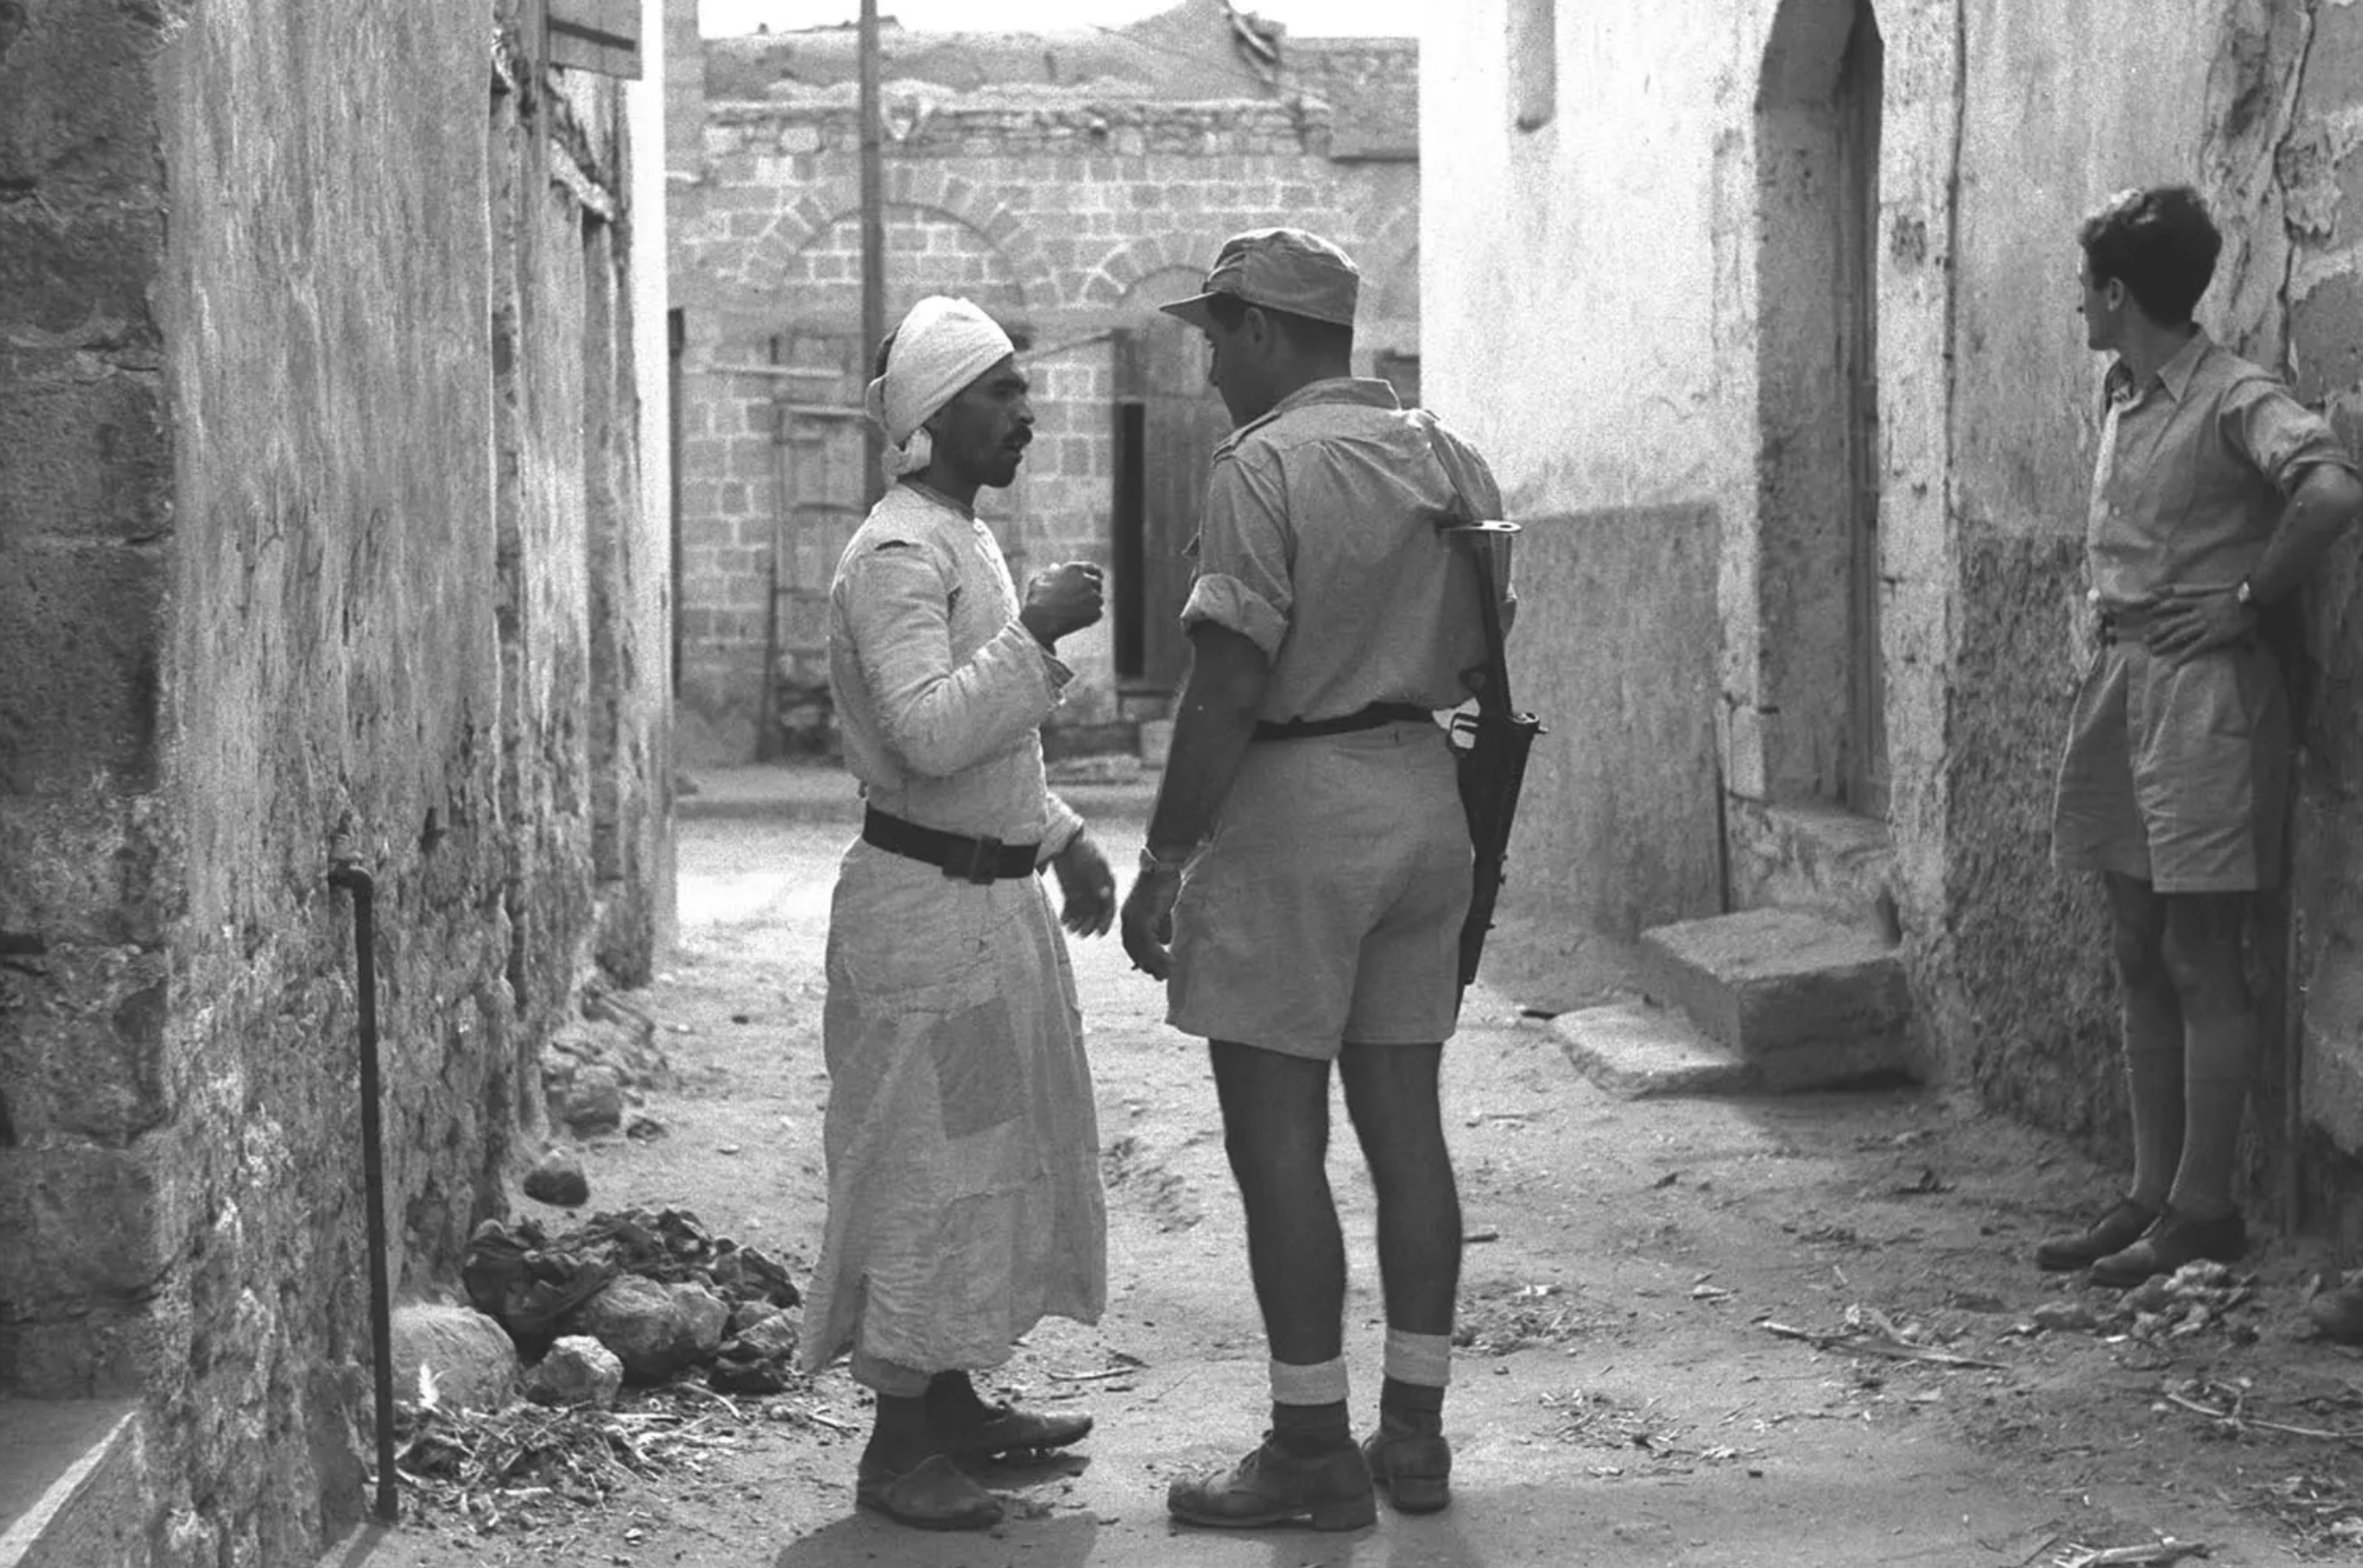 A black and white photograph taken in Al-Majdal Asqalan - Gaza: Soon after occupying the city but before expelling the indigenous Palestinian Arab population, Nov. 1948